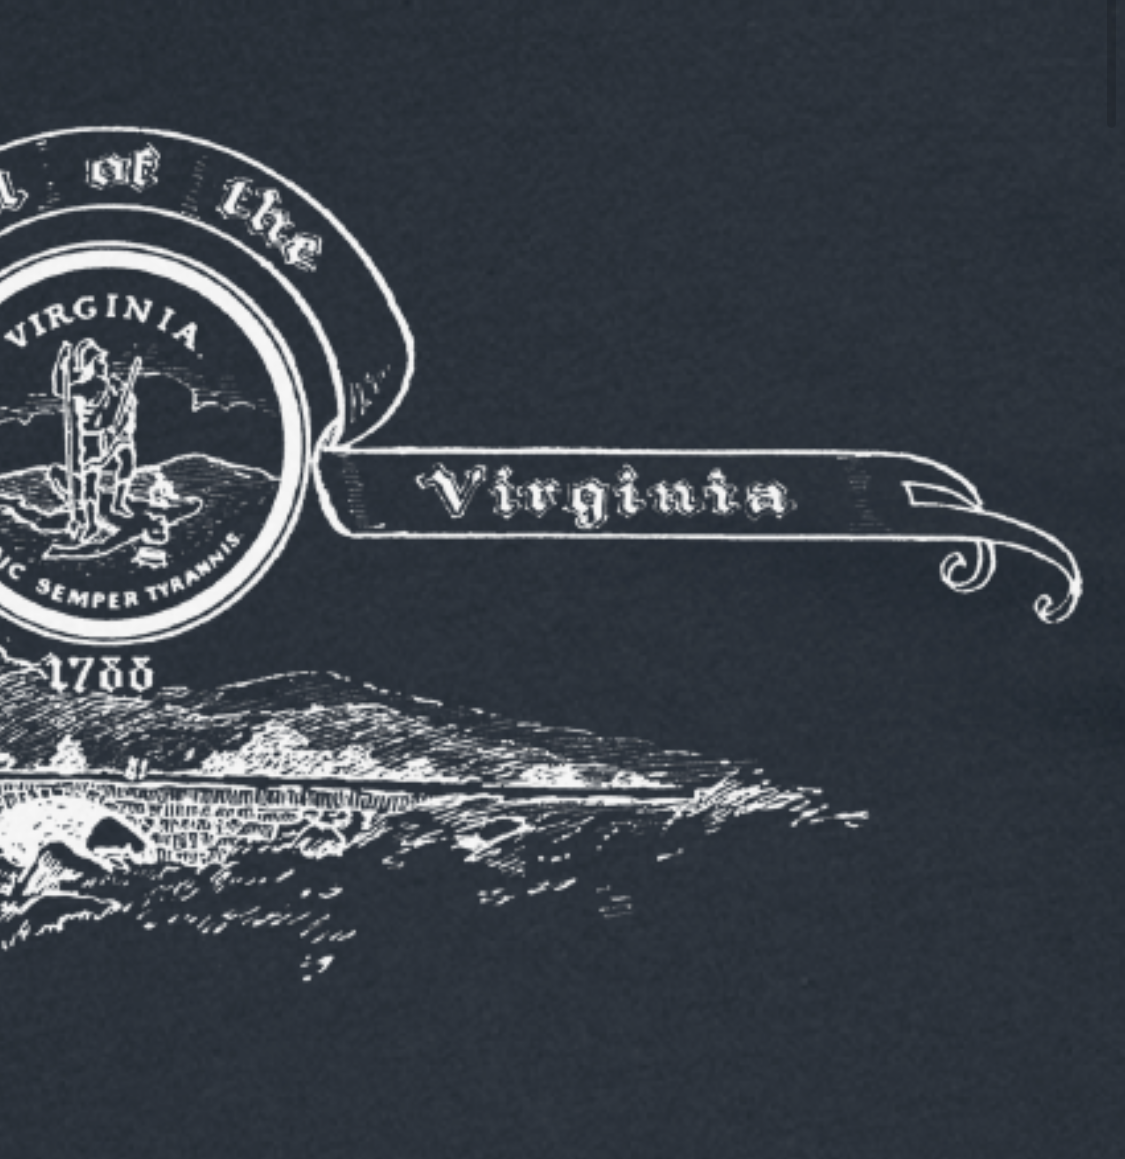 Virginia State Seal and Countryside Shirt